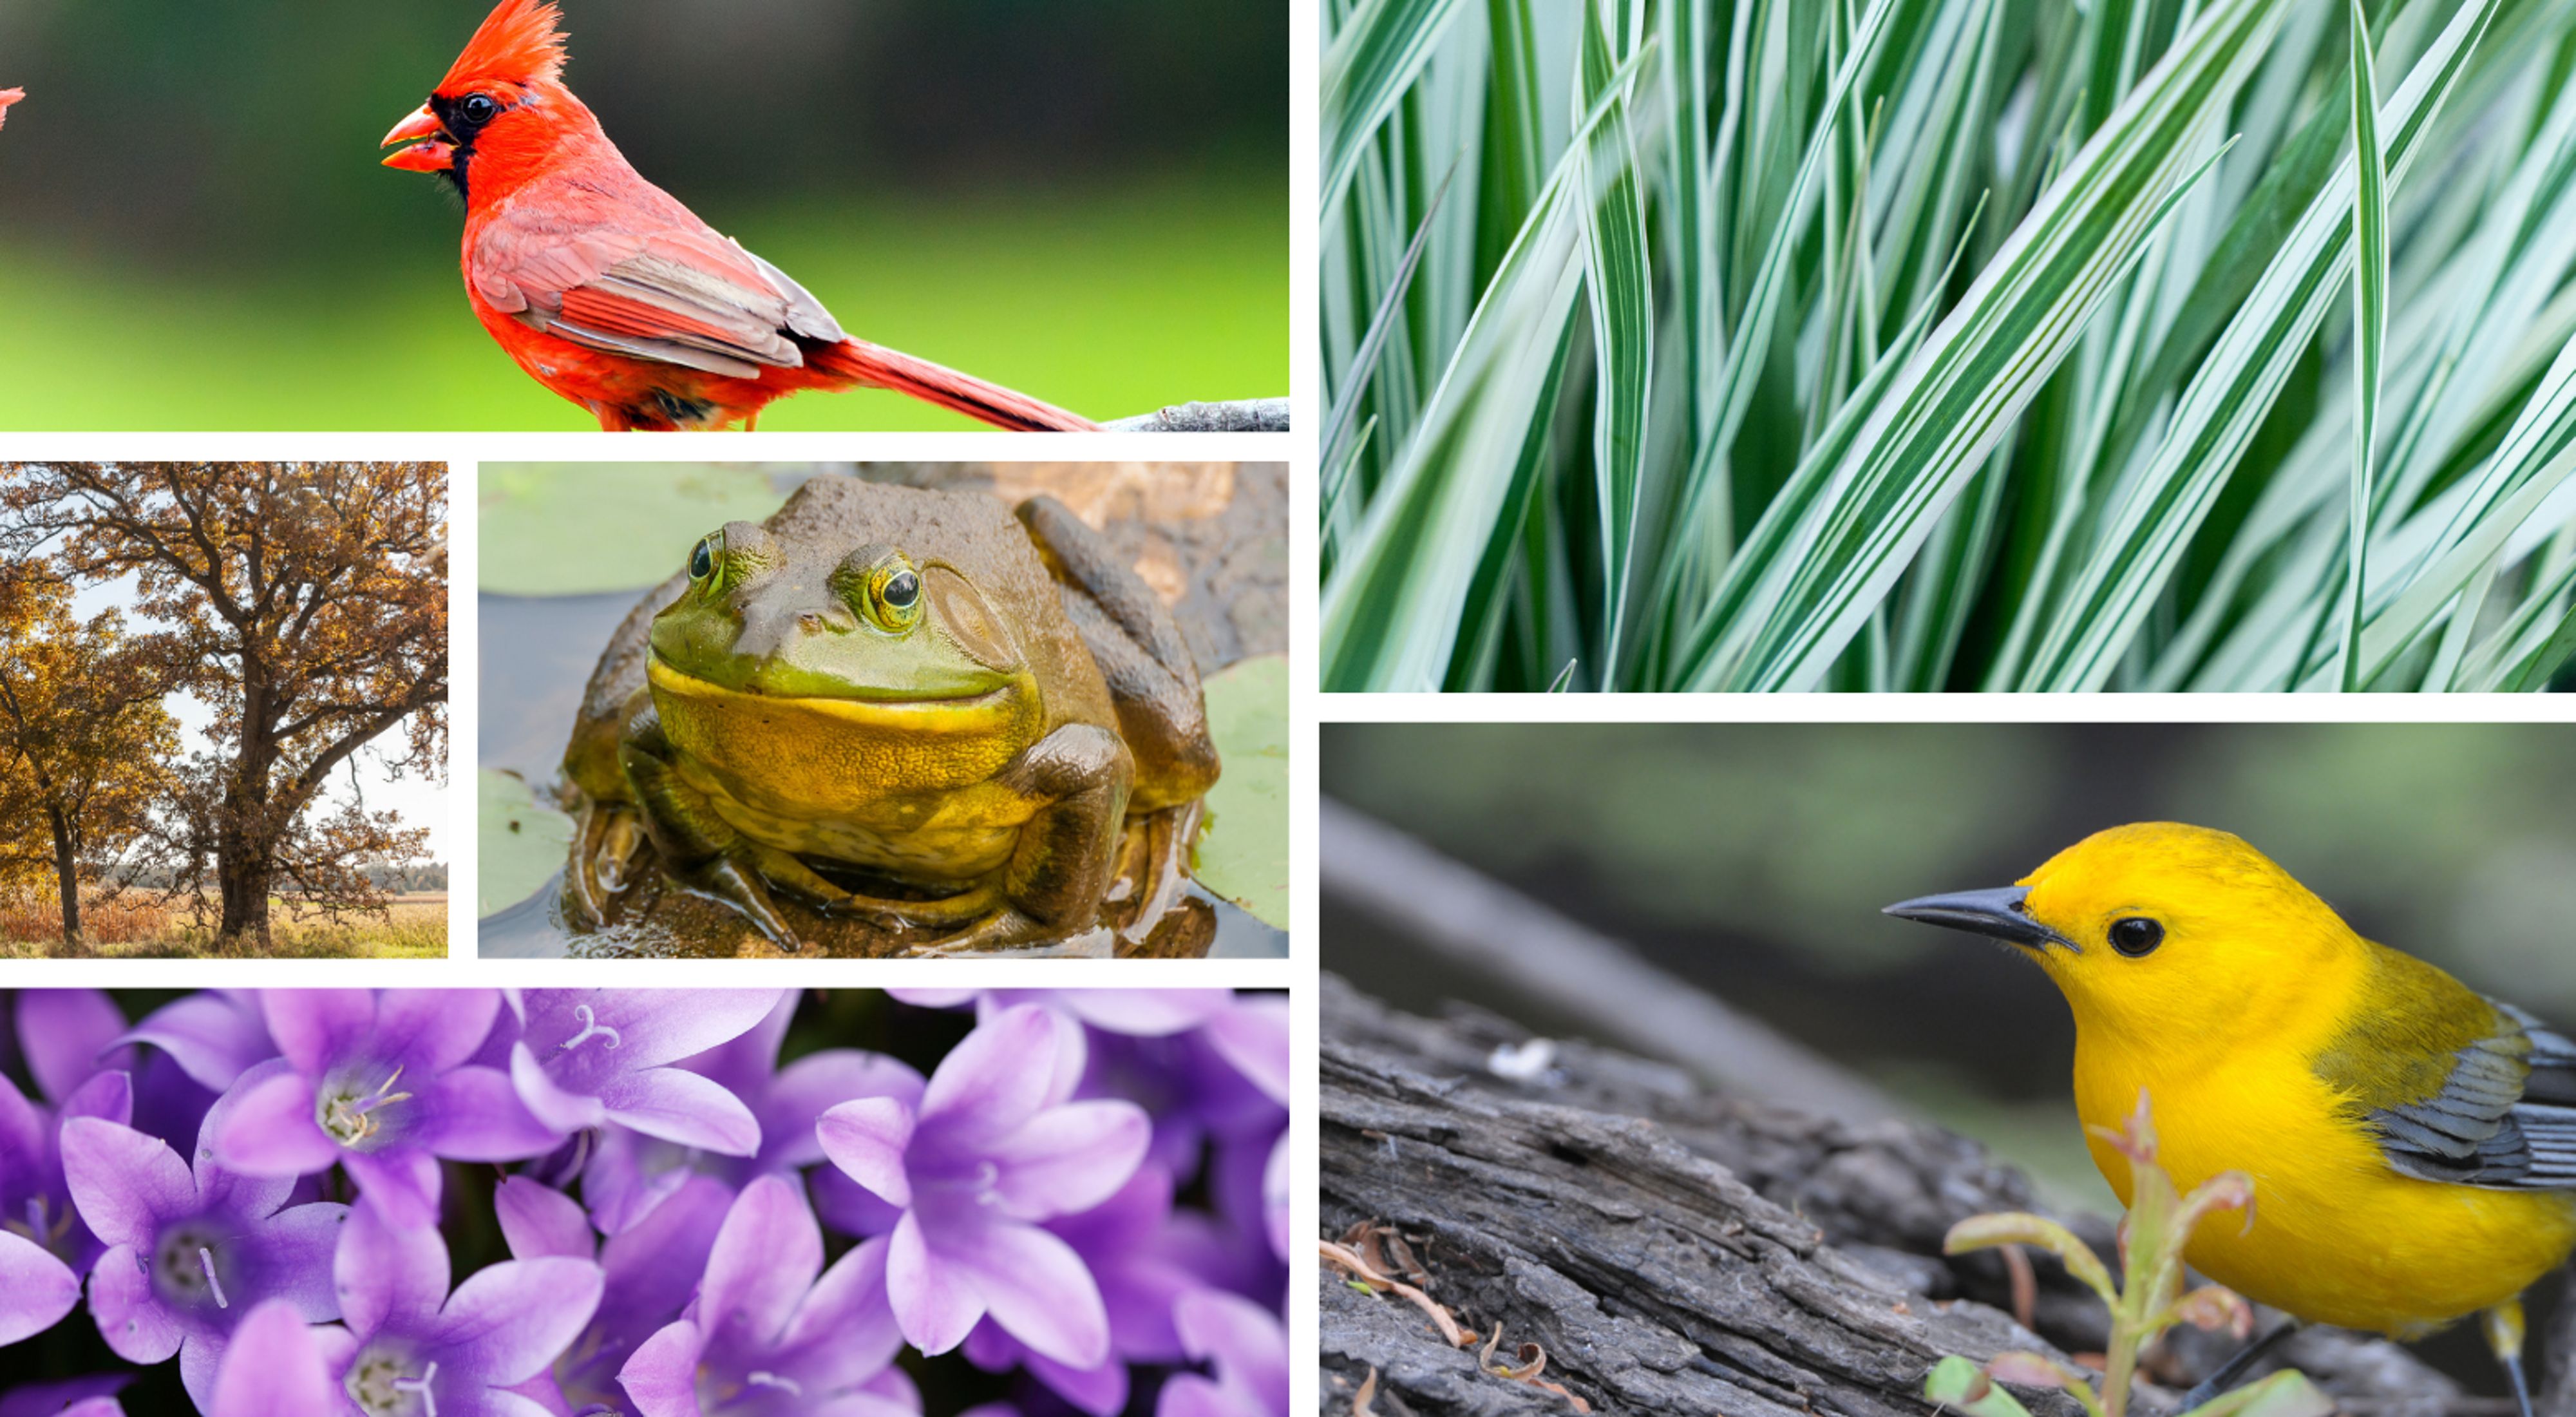 A collage of images including birds, trees, a frog, purple flowers and green grasses.